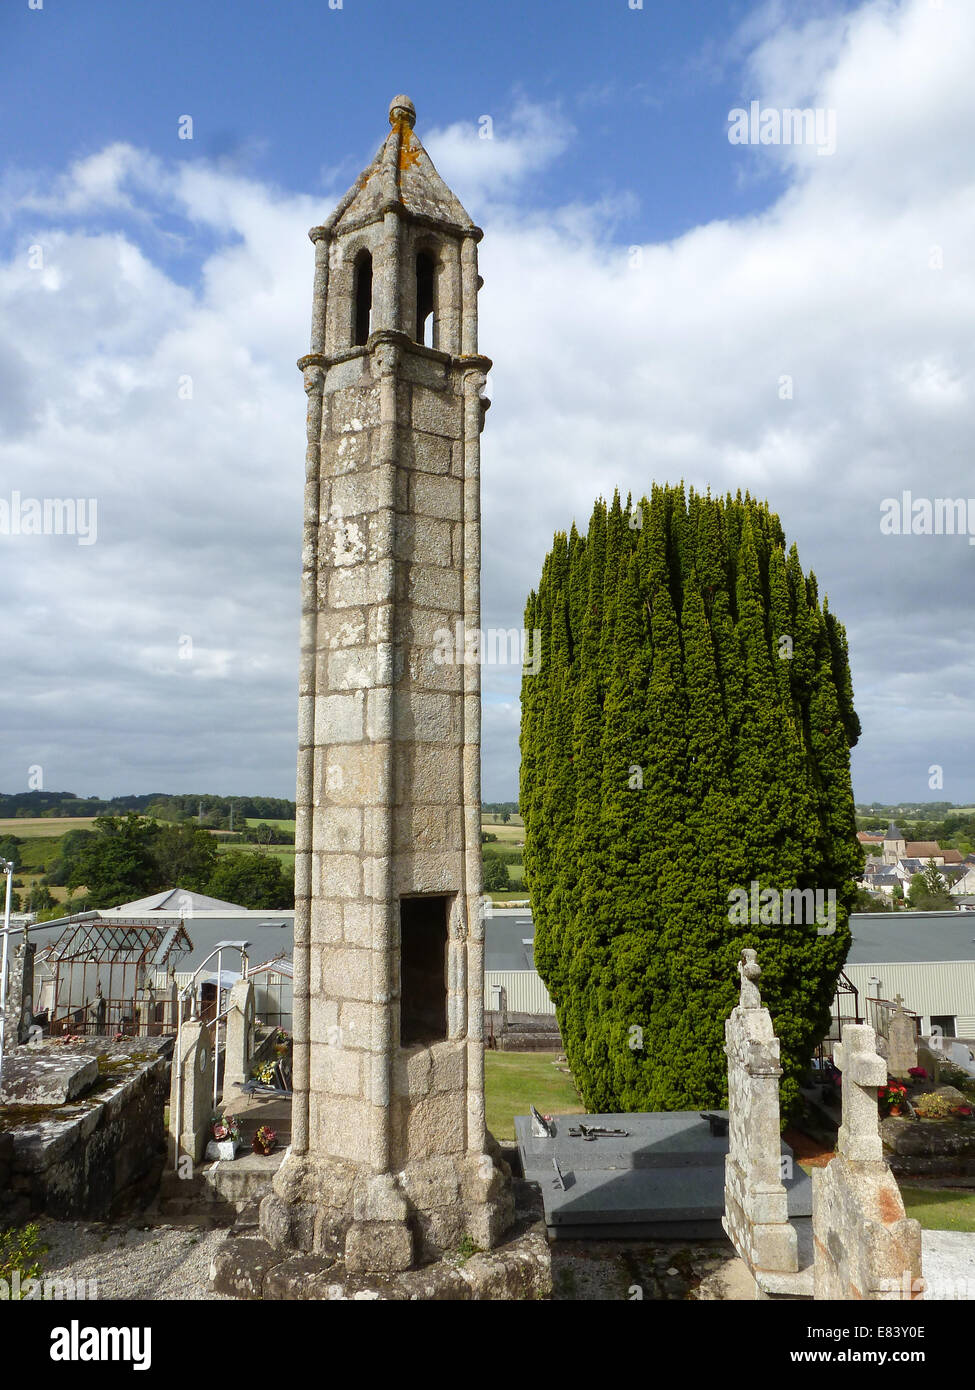 laterne des morts from St. Agnant de Versillat, France Stock Photo